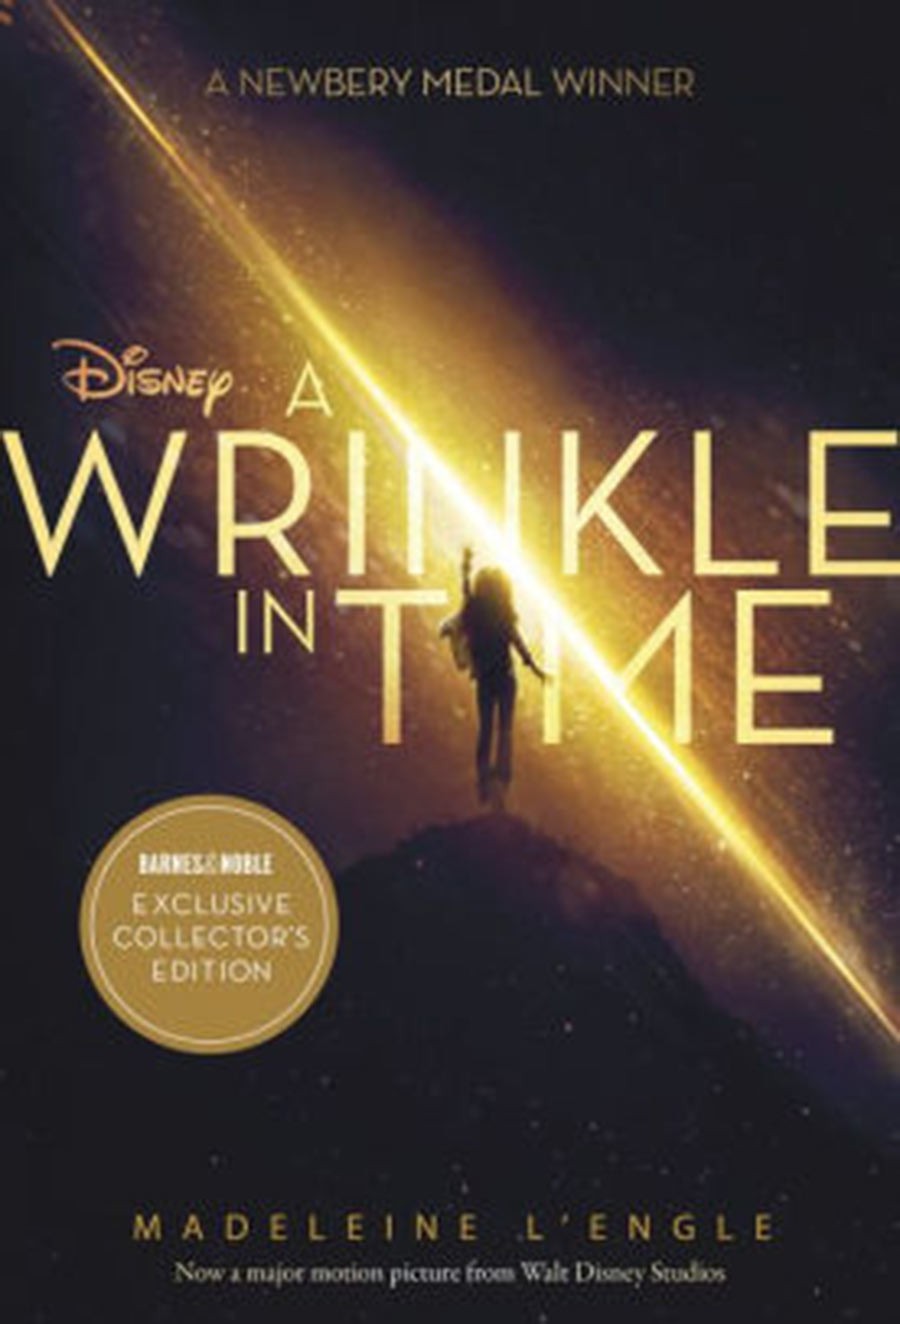 A Wrinkle in Time - Barnes & Noble Edition